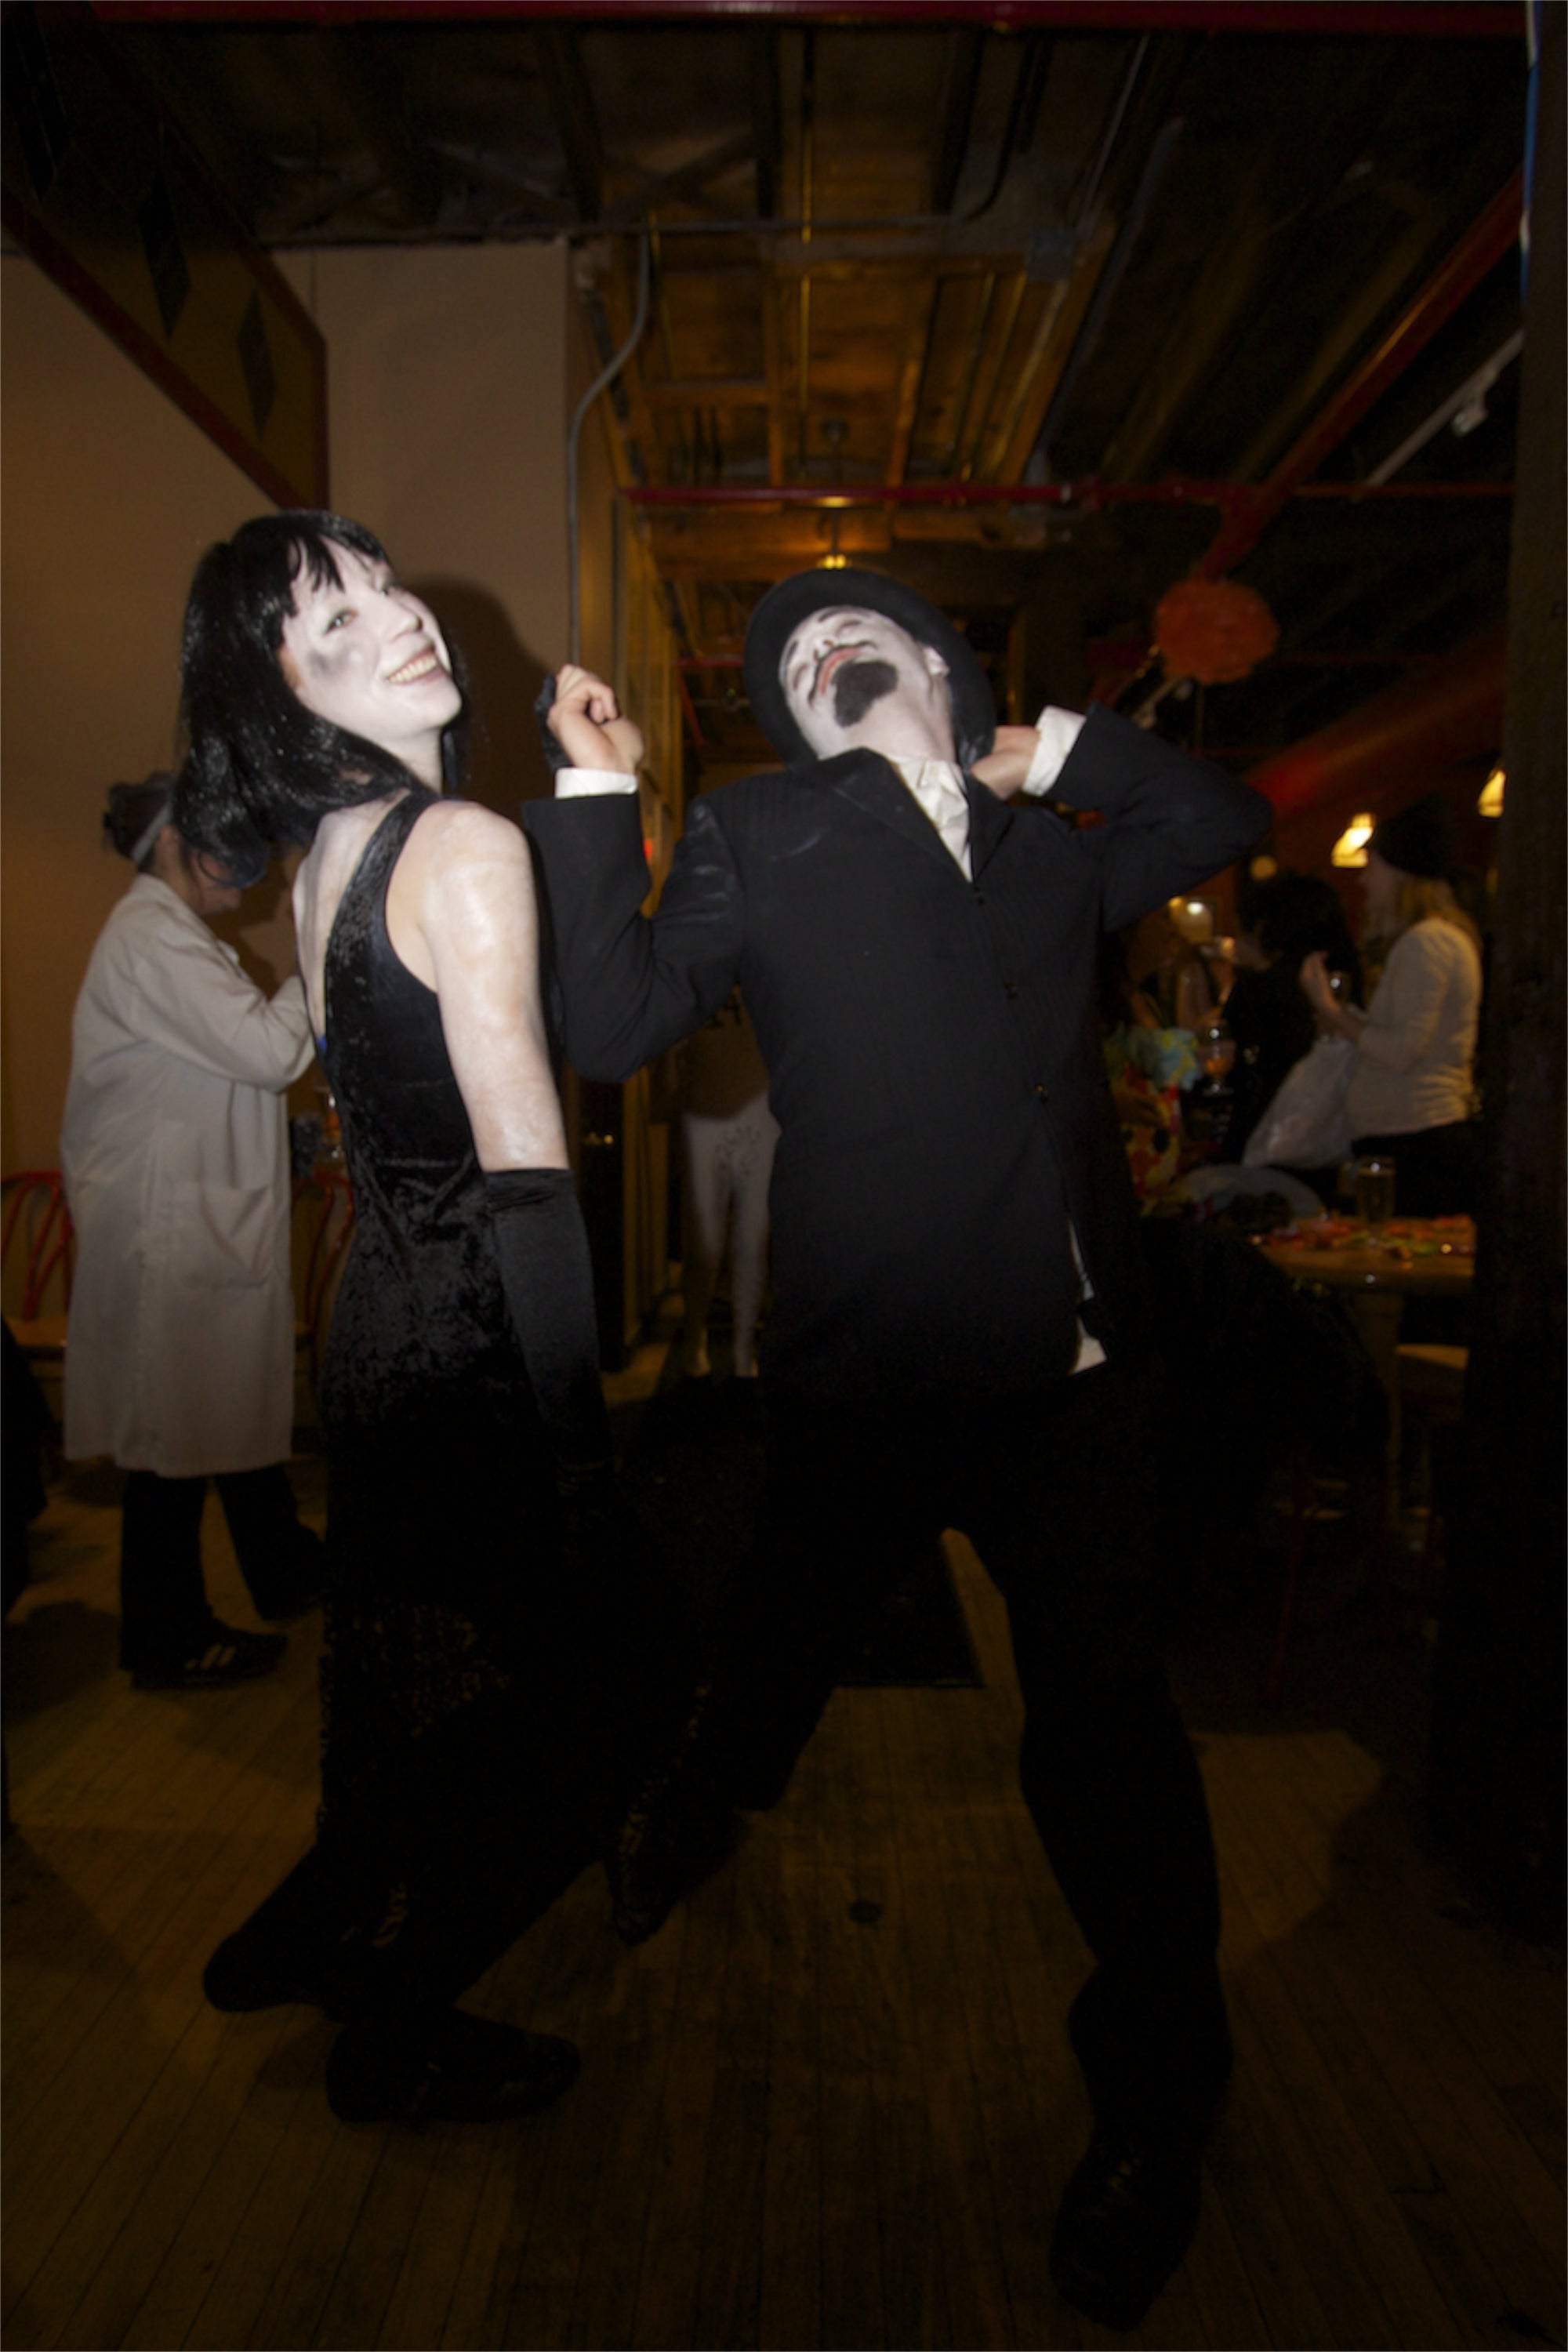 Two students dressed as black and white movie actors